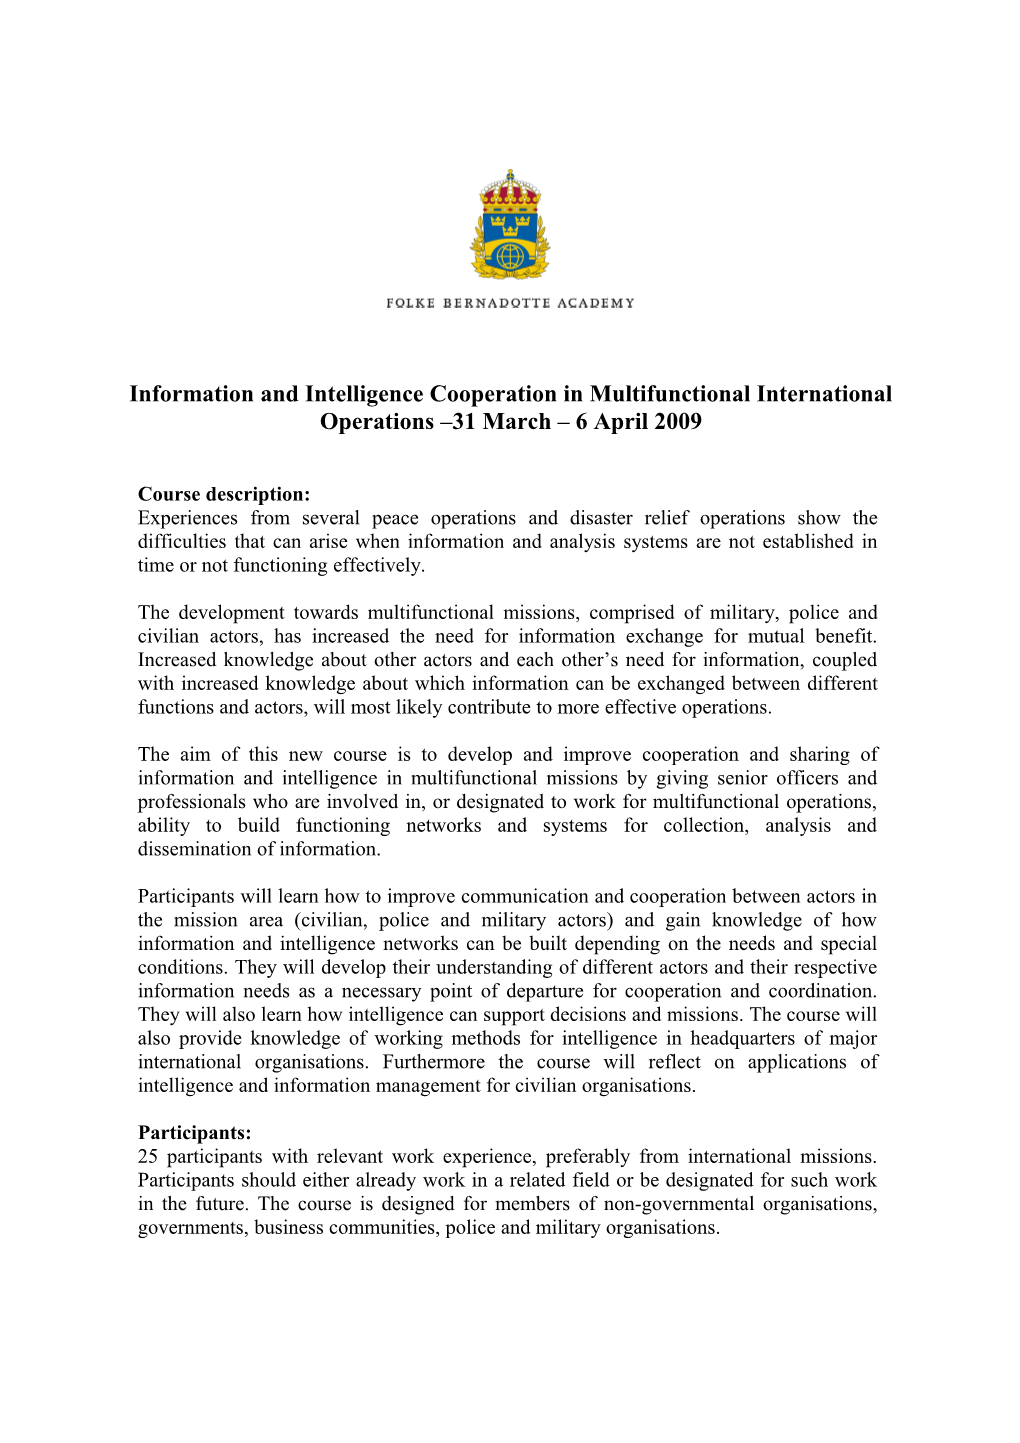 Information and Intelligence Cooperation in Multifunctional International Operations 31